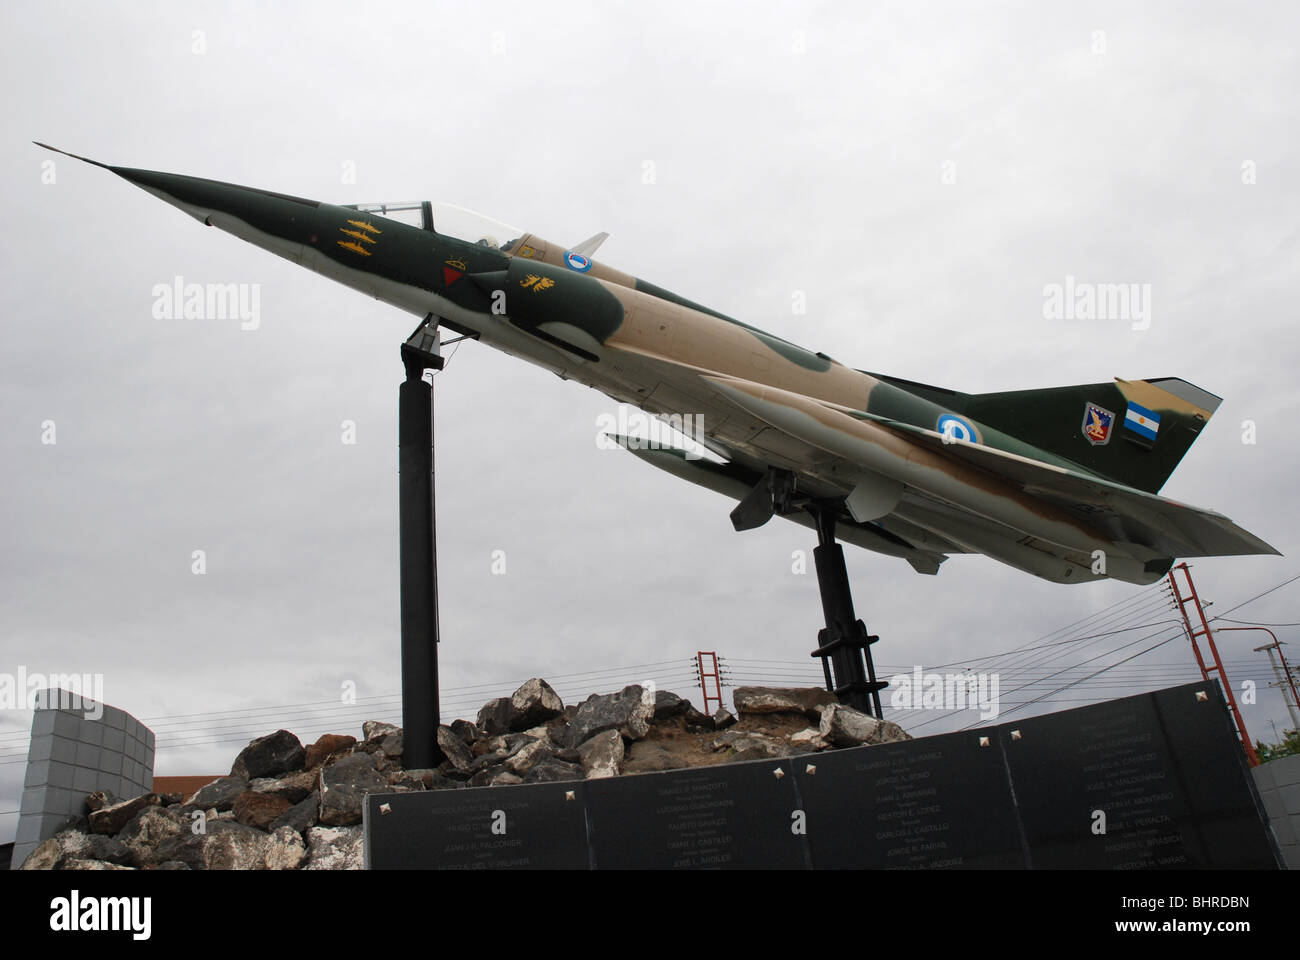 Super Etendard jet mounted as a monument to the Falklands war of 1982 located in San Julian, Argentina. Claimed to the the first Stock Photo